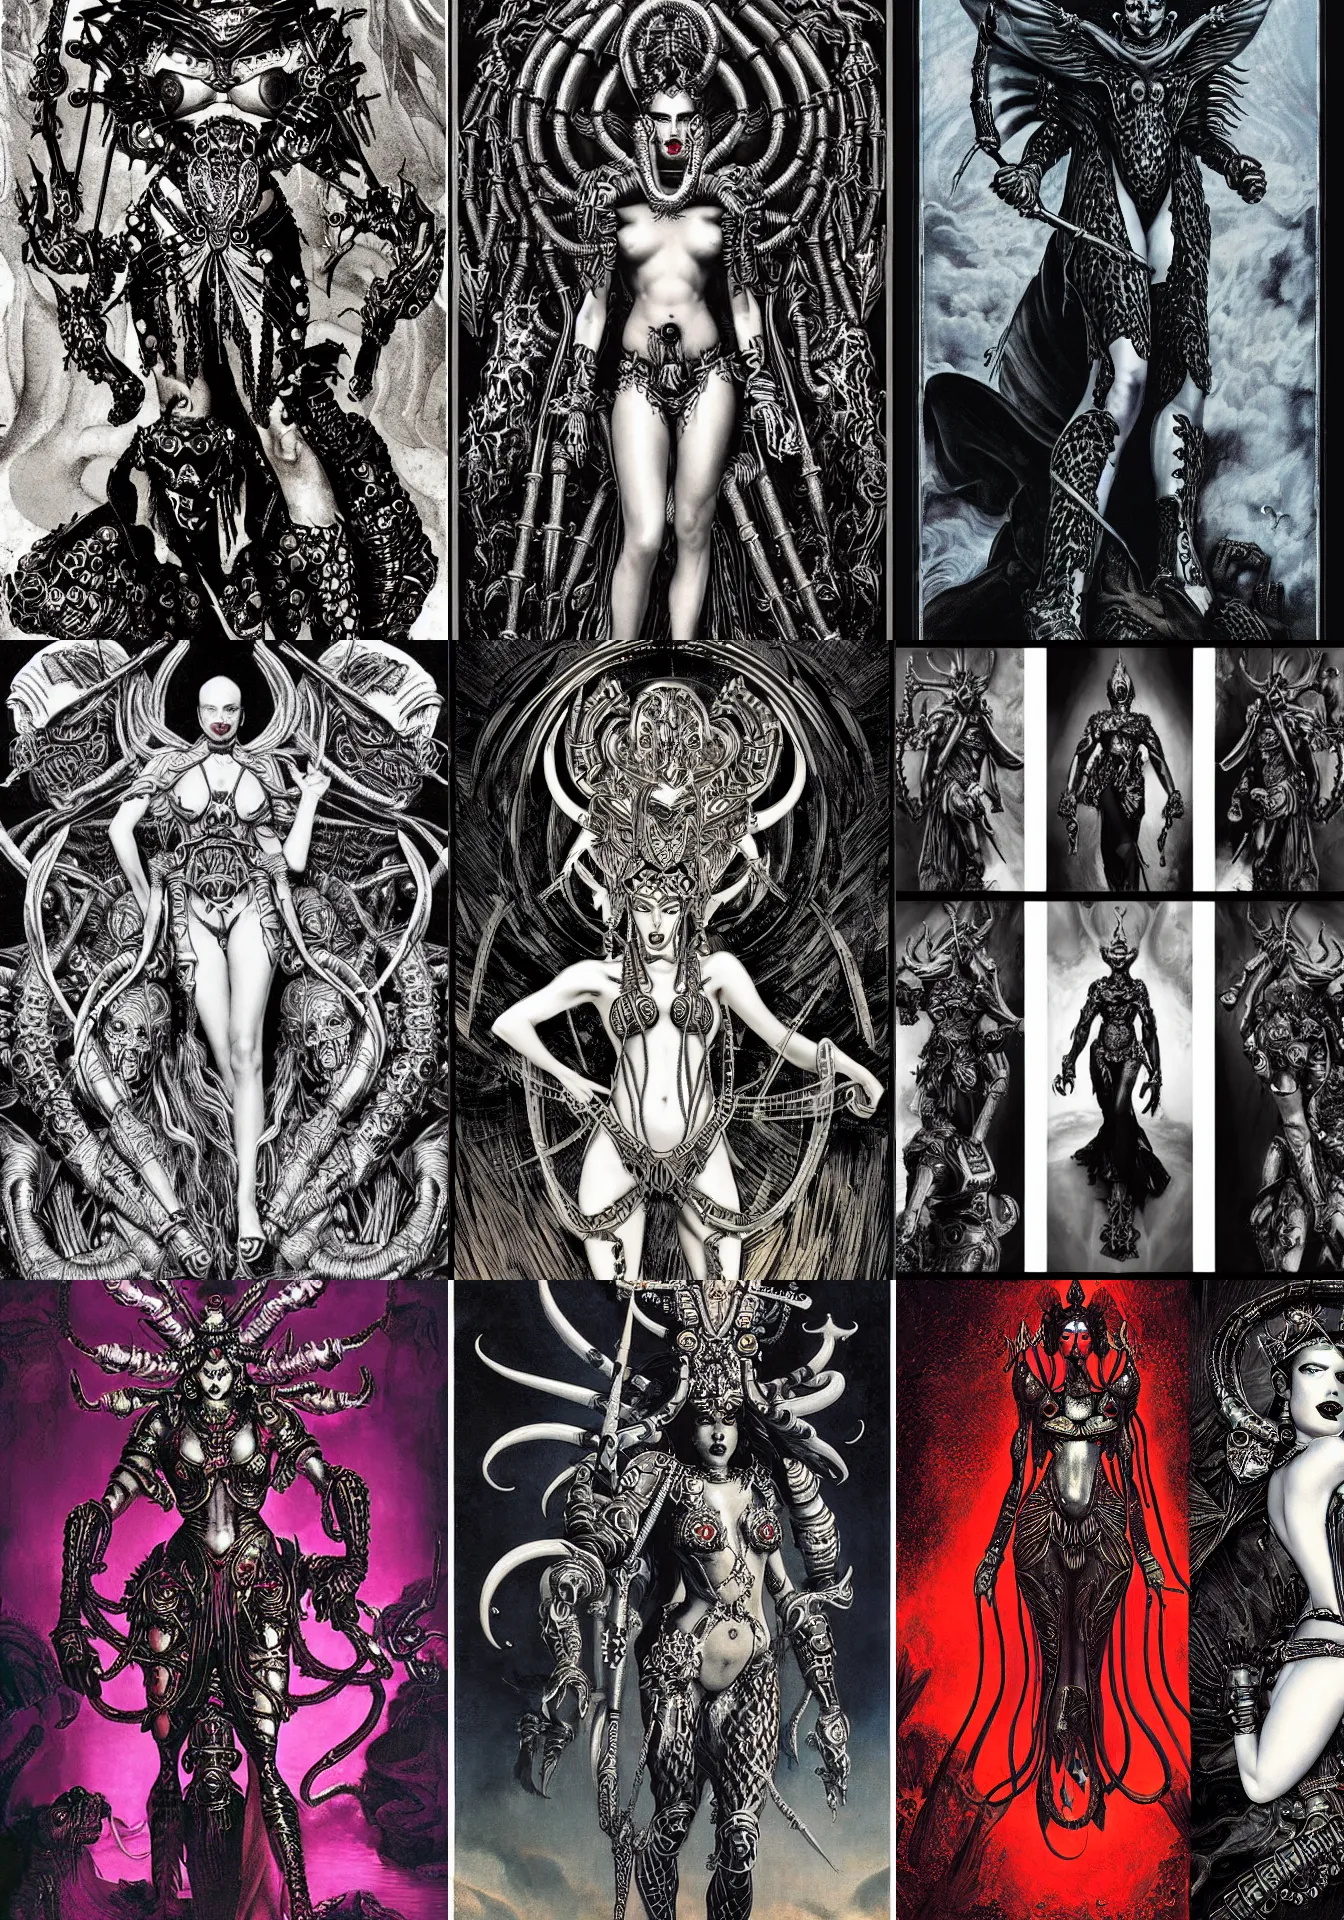 Prompt: avantgarde starcraft archon kali durga editorial by marek okon designed by alexander mcqueen rendered by caravaggio and by virgil finlay